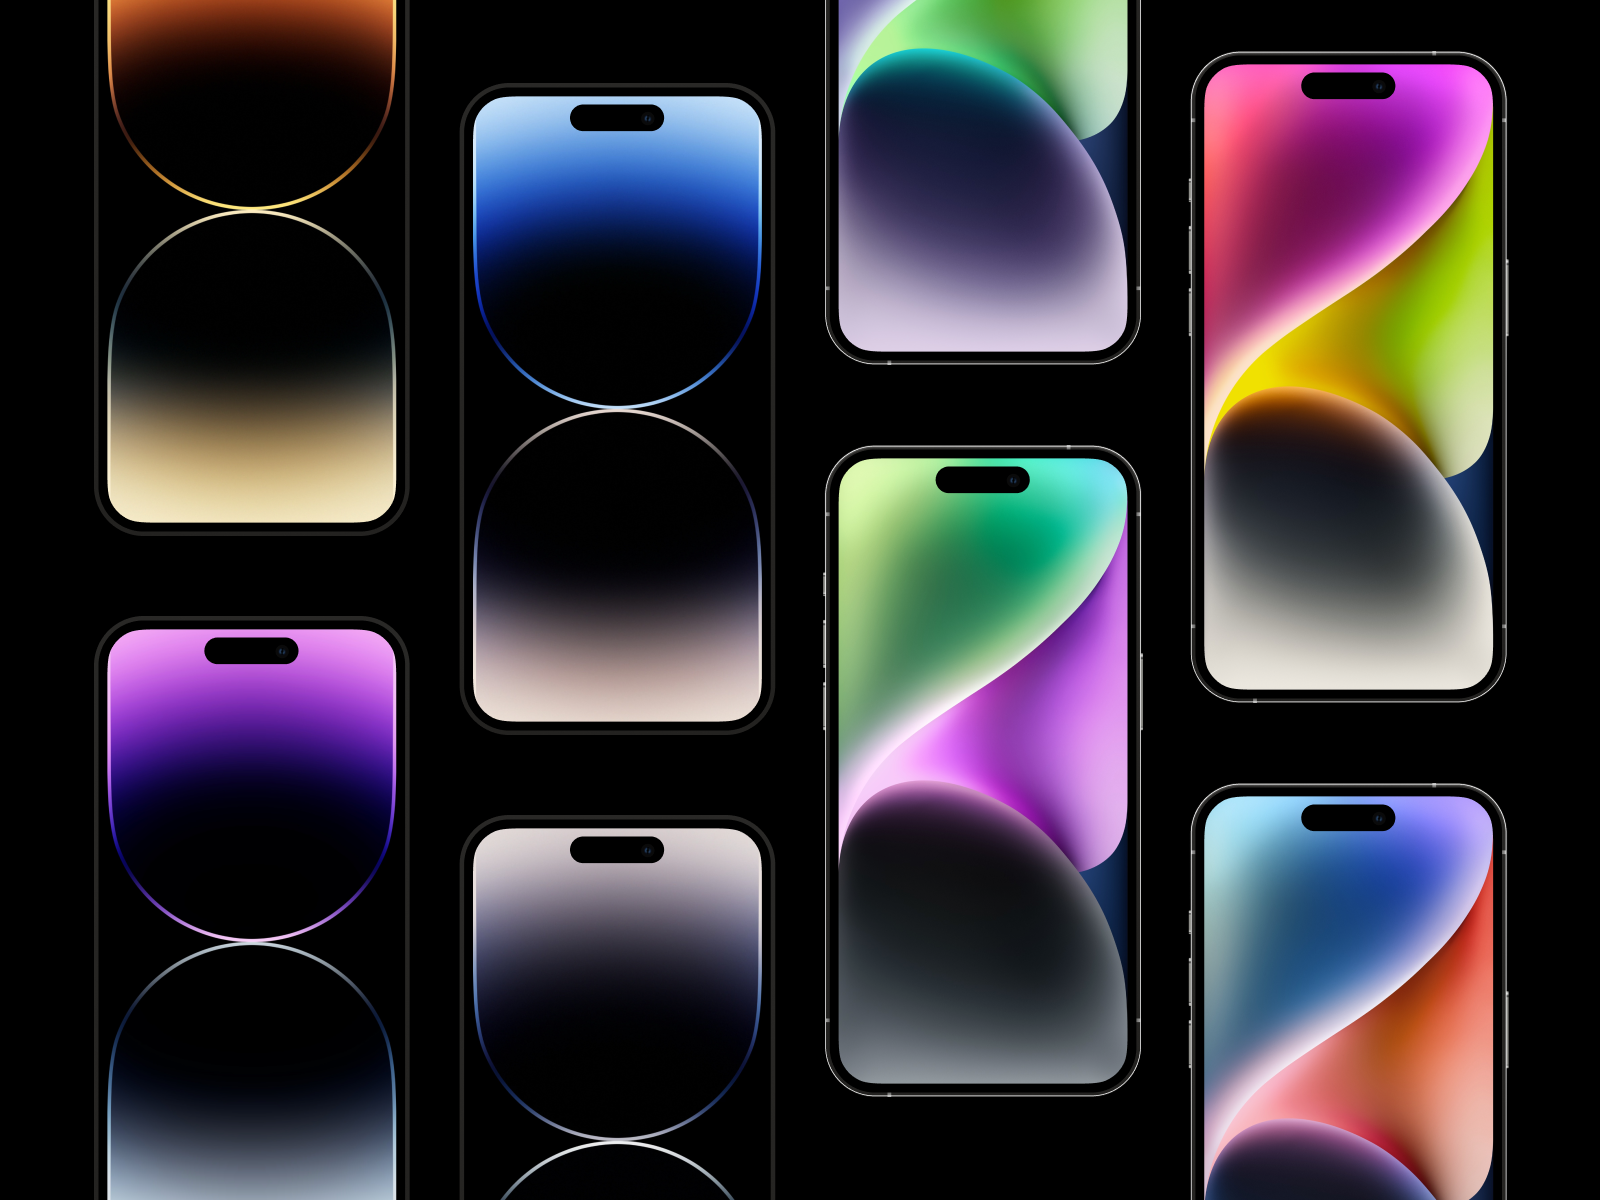 iPhone 14 pro wallpapers by George Turp on Dribbble